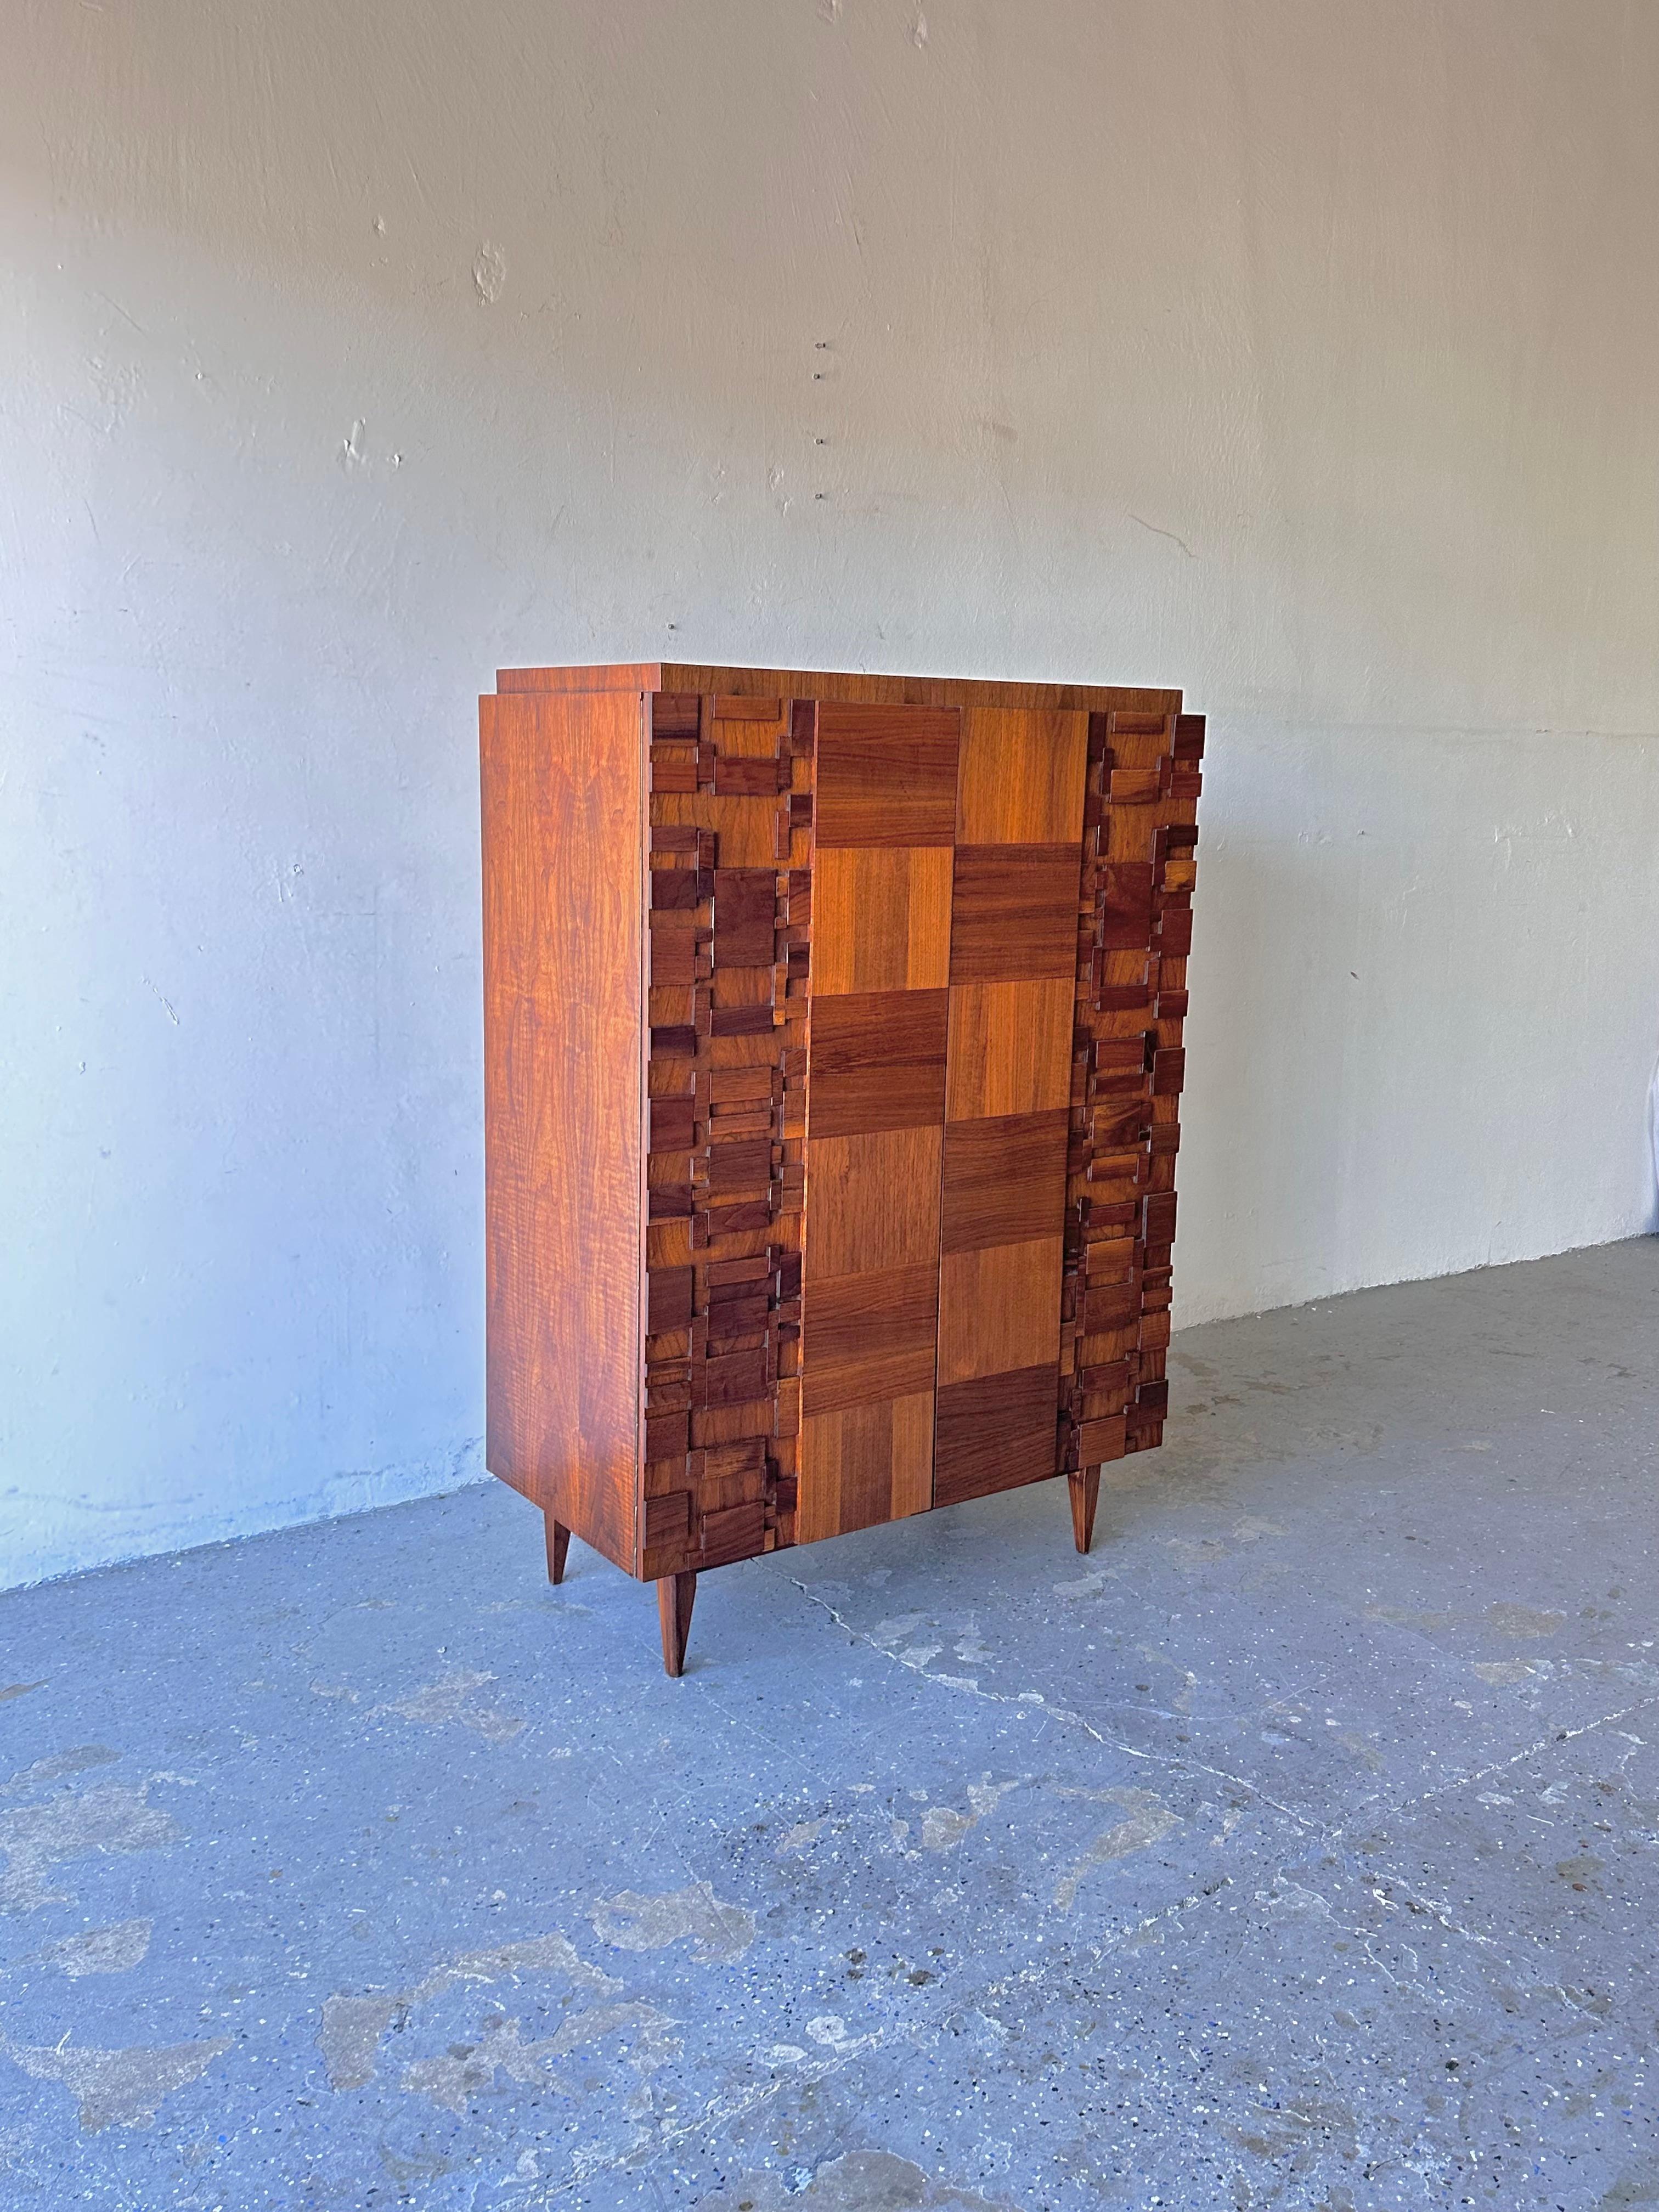 1970s Paul Evans Style Lane Brutalist Mid Century  Armoire

Mid-Century Modern Brutalist Wardrobe, Armoire, Dresser. An incredible brutalist wardrobe/highboy  in walnut wood. The center front has  panels in alternating grain, creating a patchwork